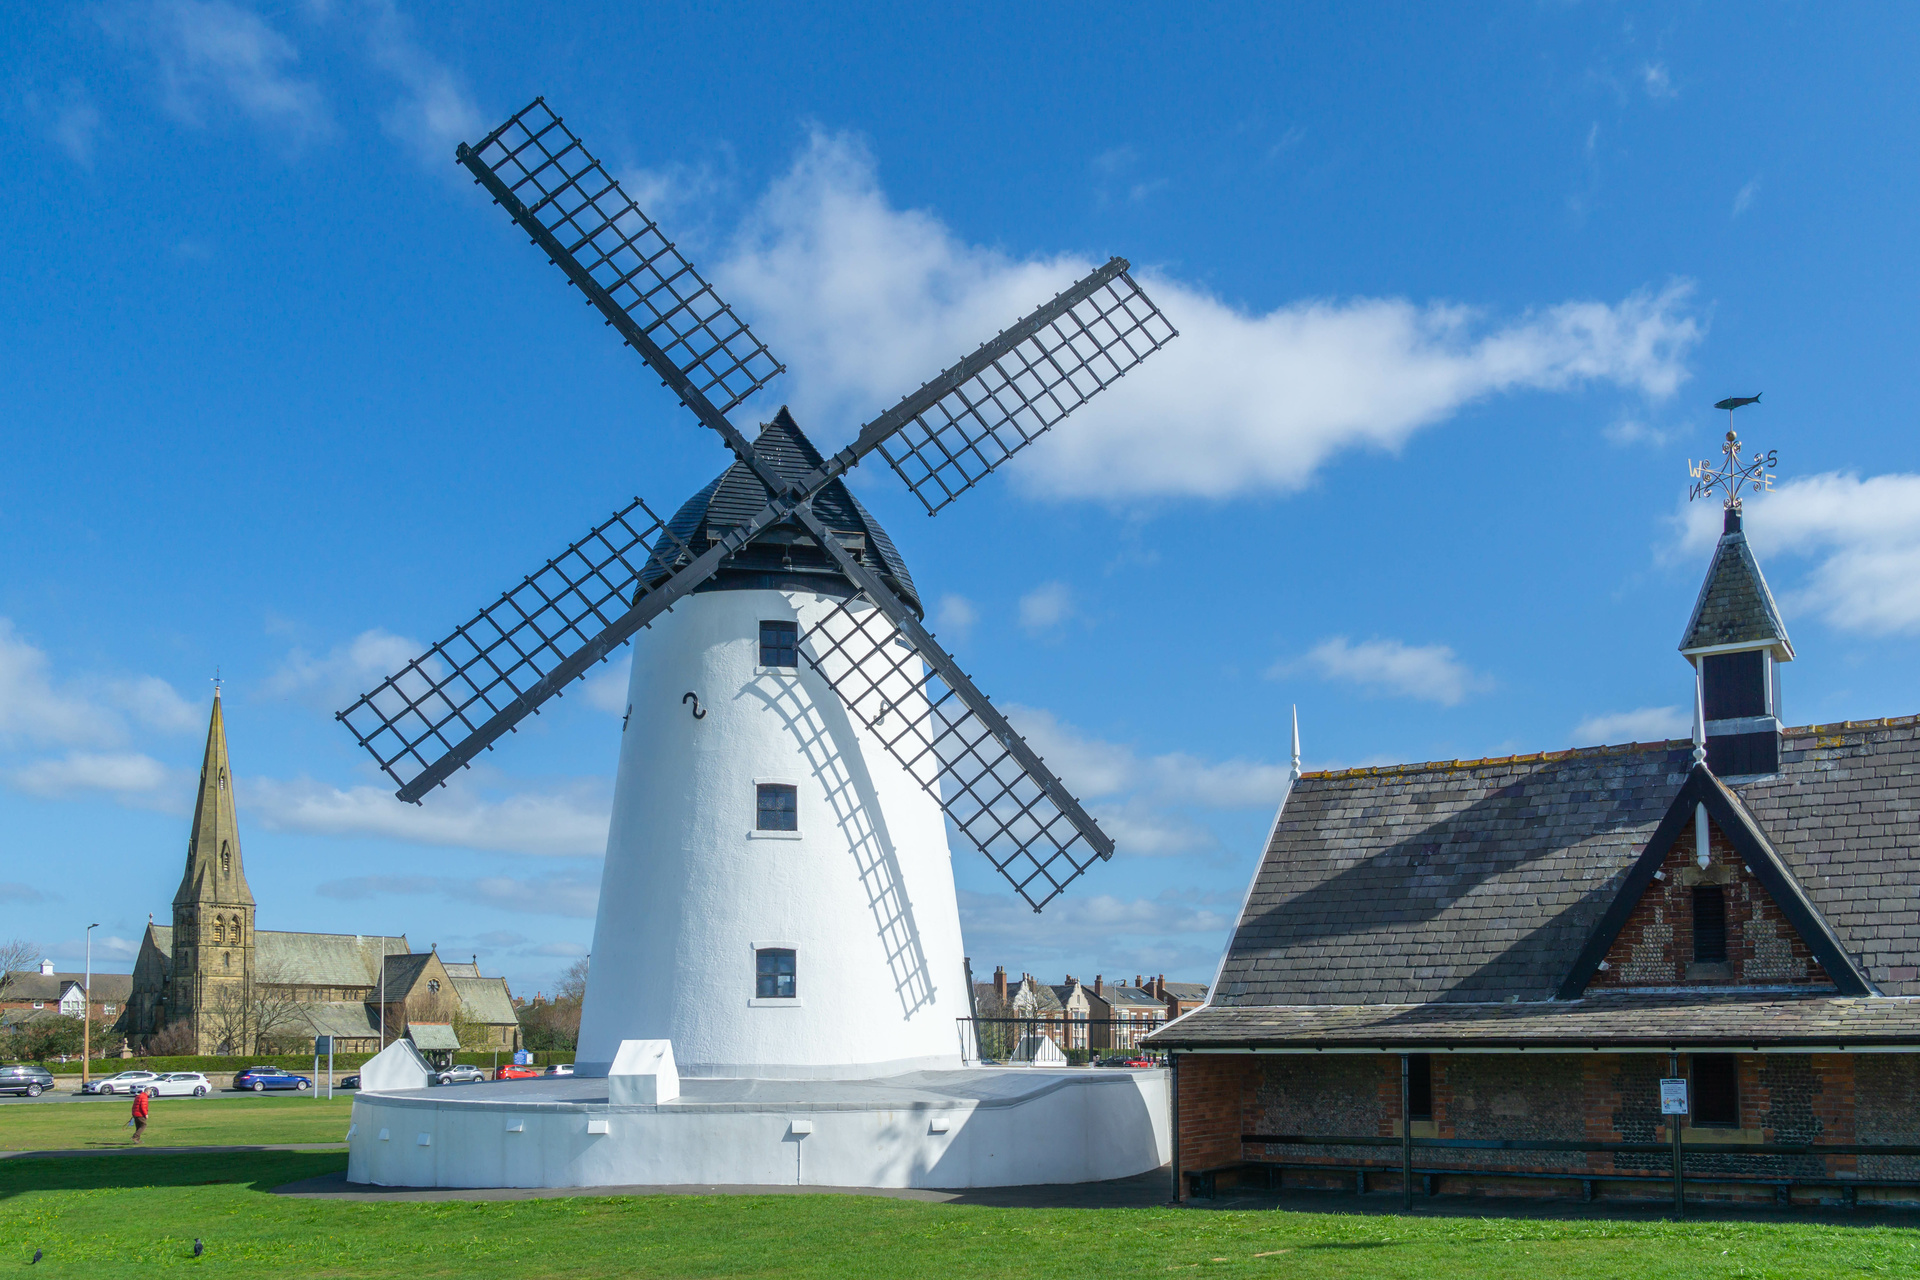 Lytham Windmill, round the corner from our Conveyancing Solicitors in Lytham at The Old Bakery, 1 Green Street, Lytham.